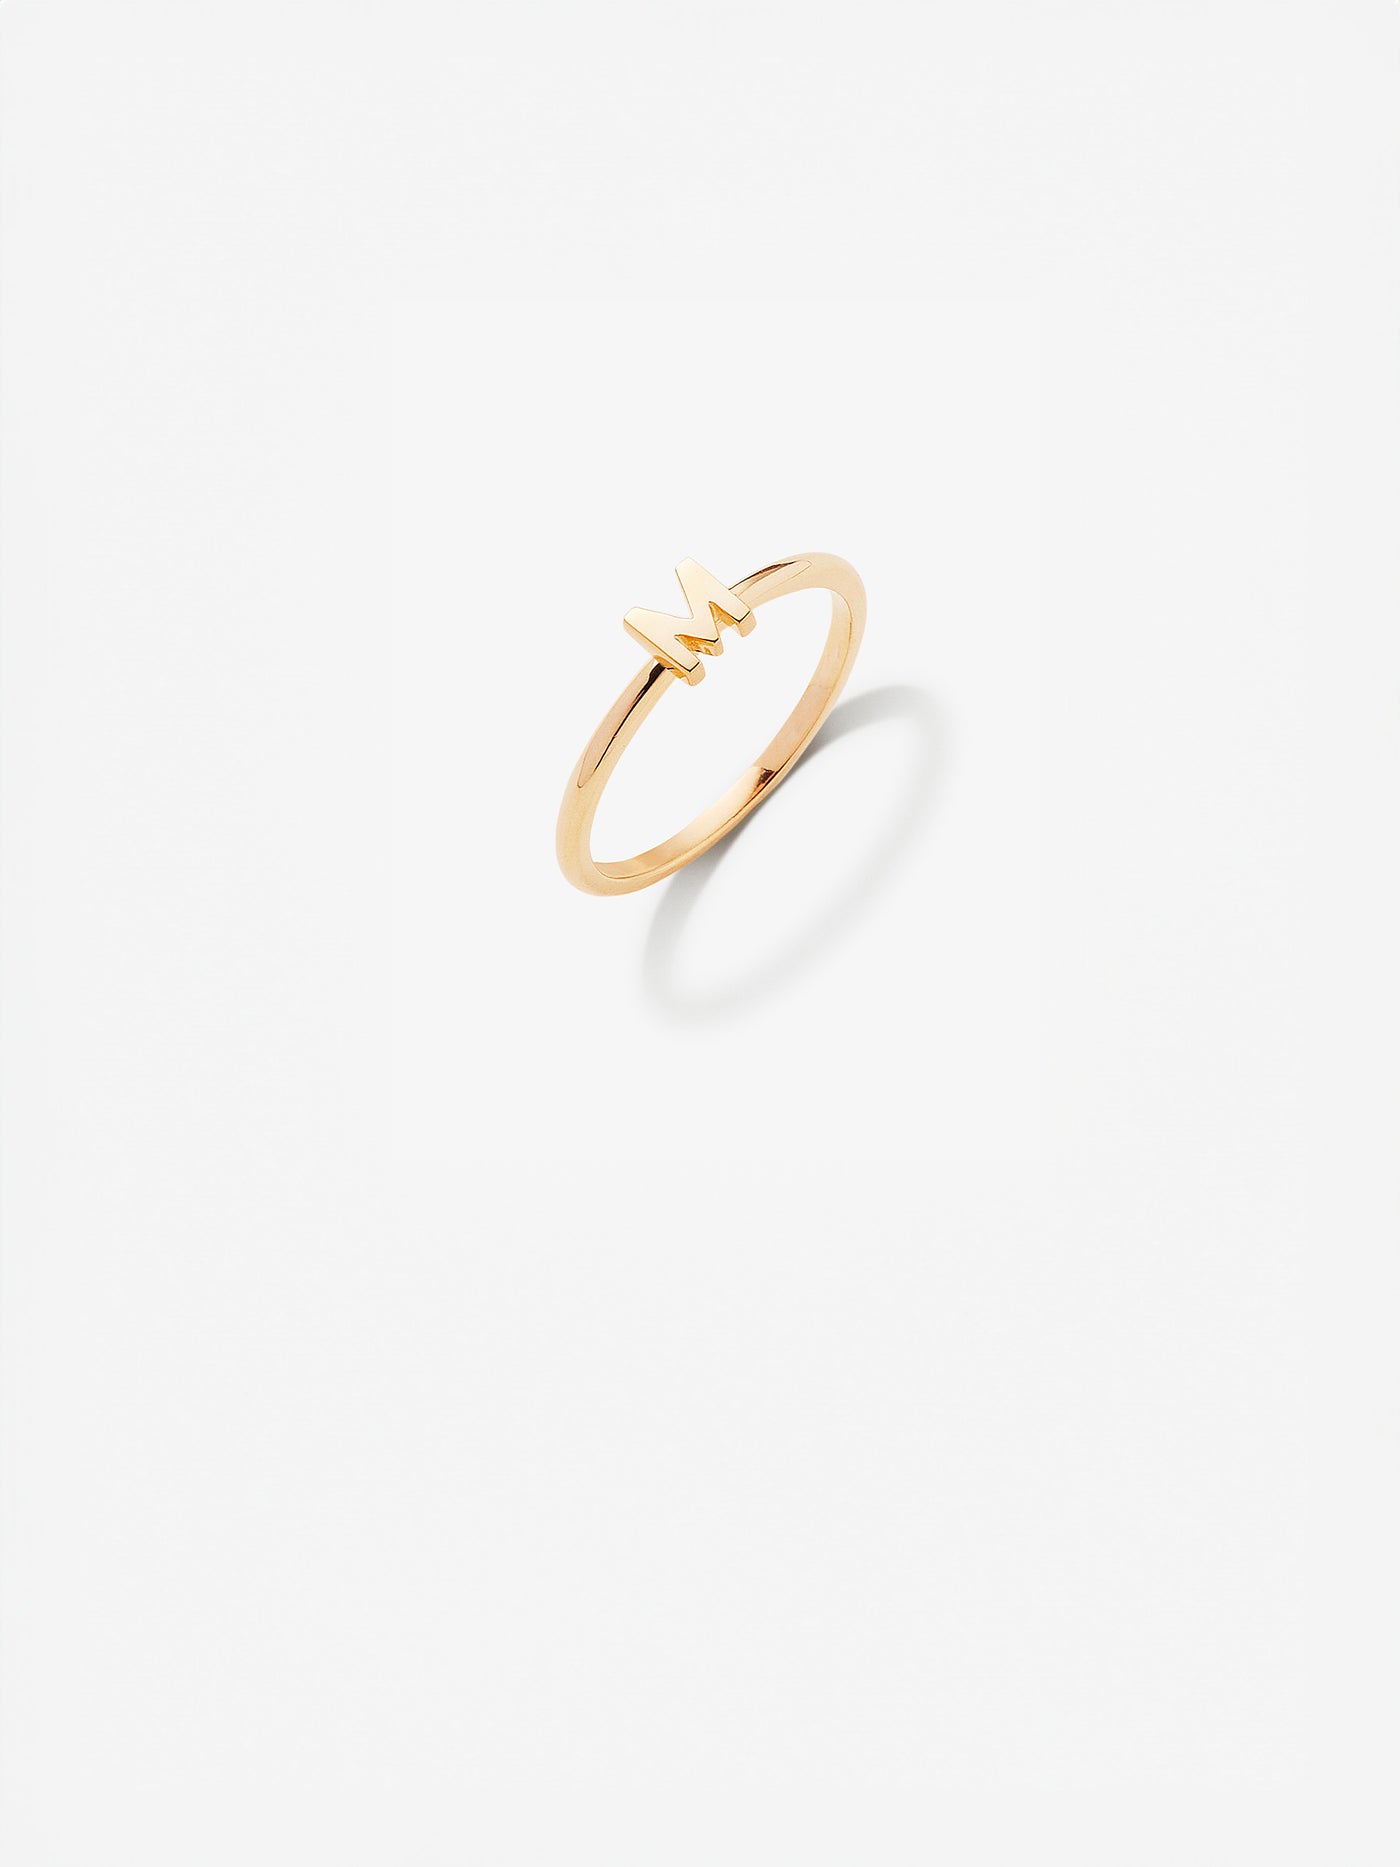 Close-up image of a personalised M gold ring adorned with intricate, miniature dimensional letters from the alphabet on a light grey background 